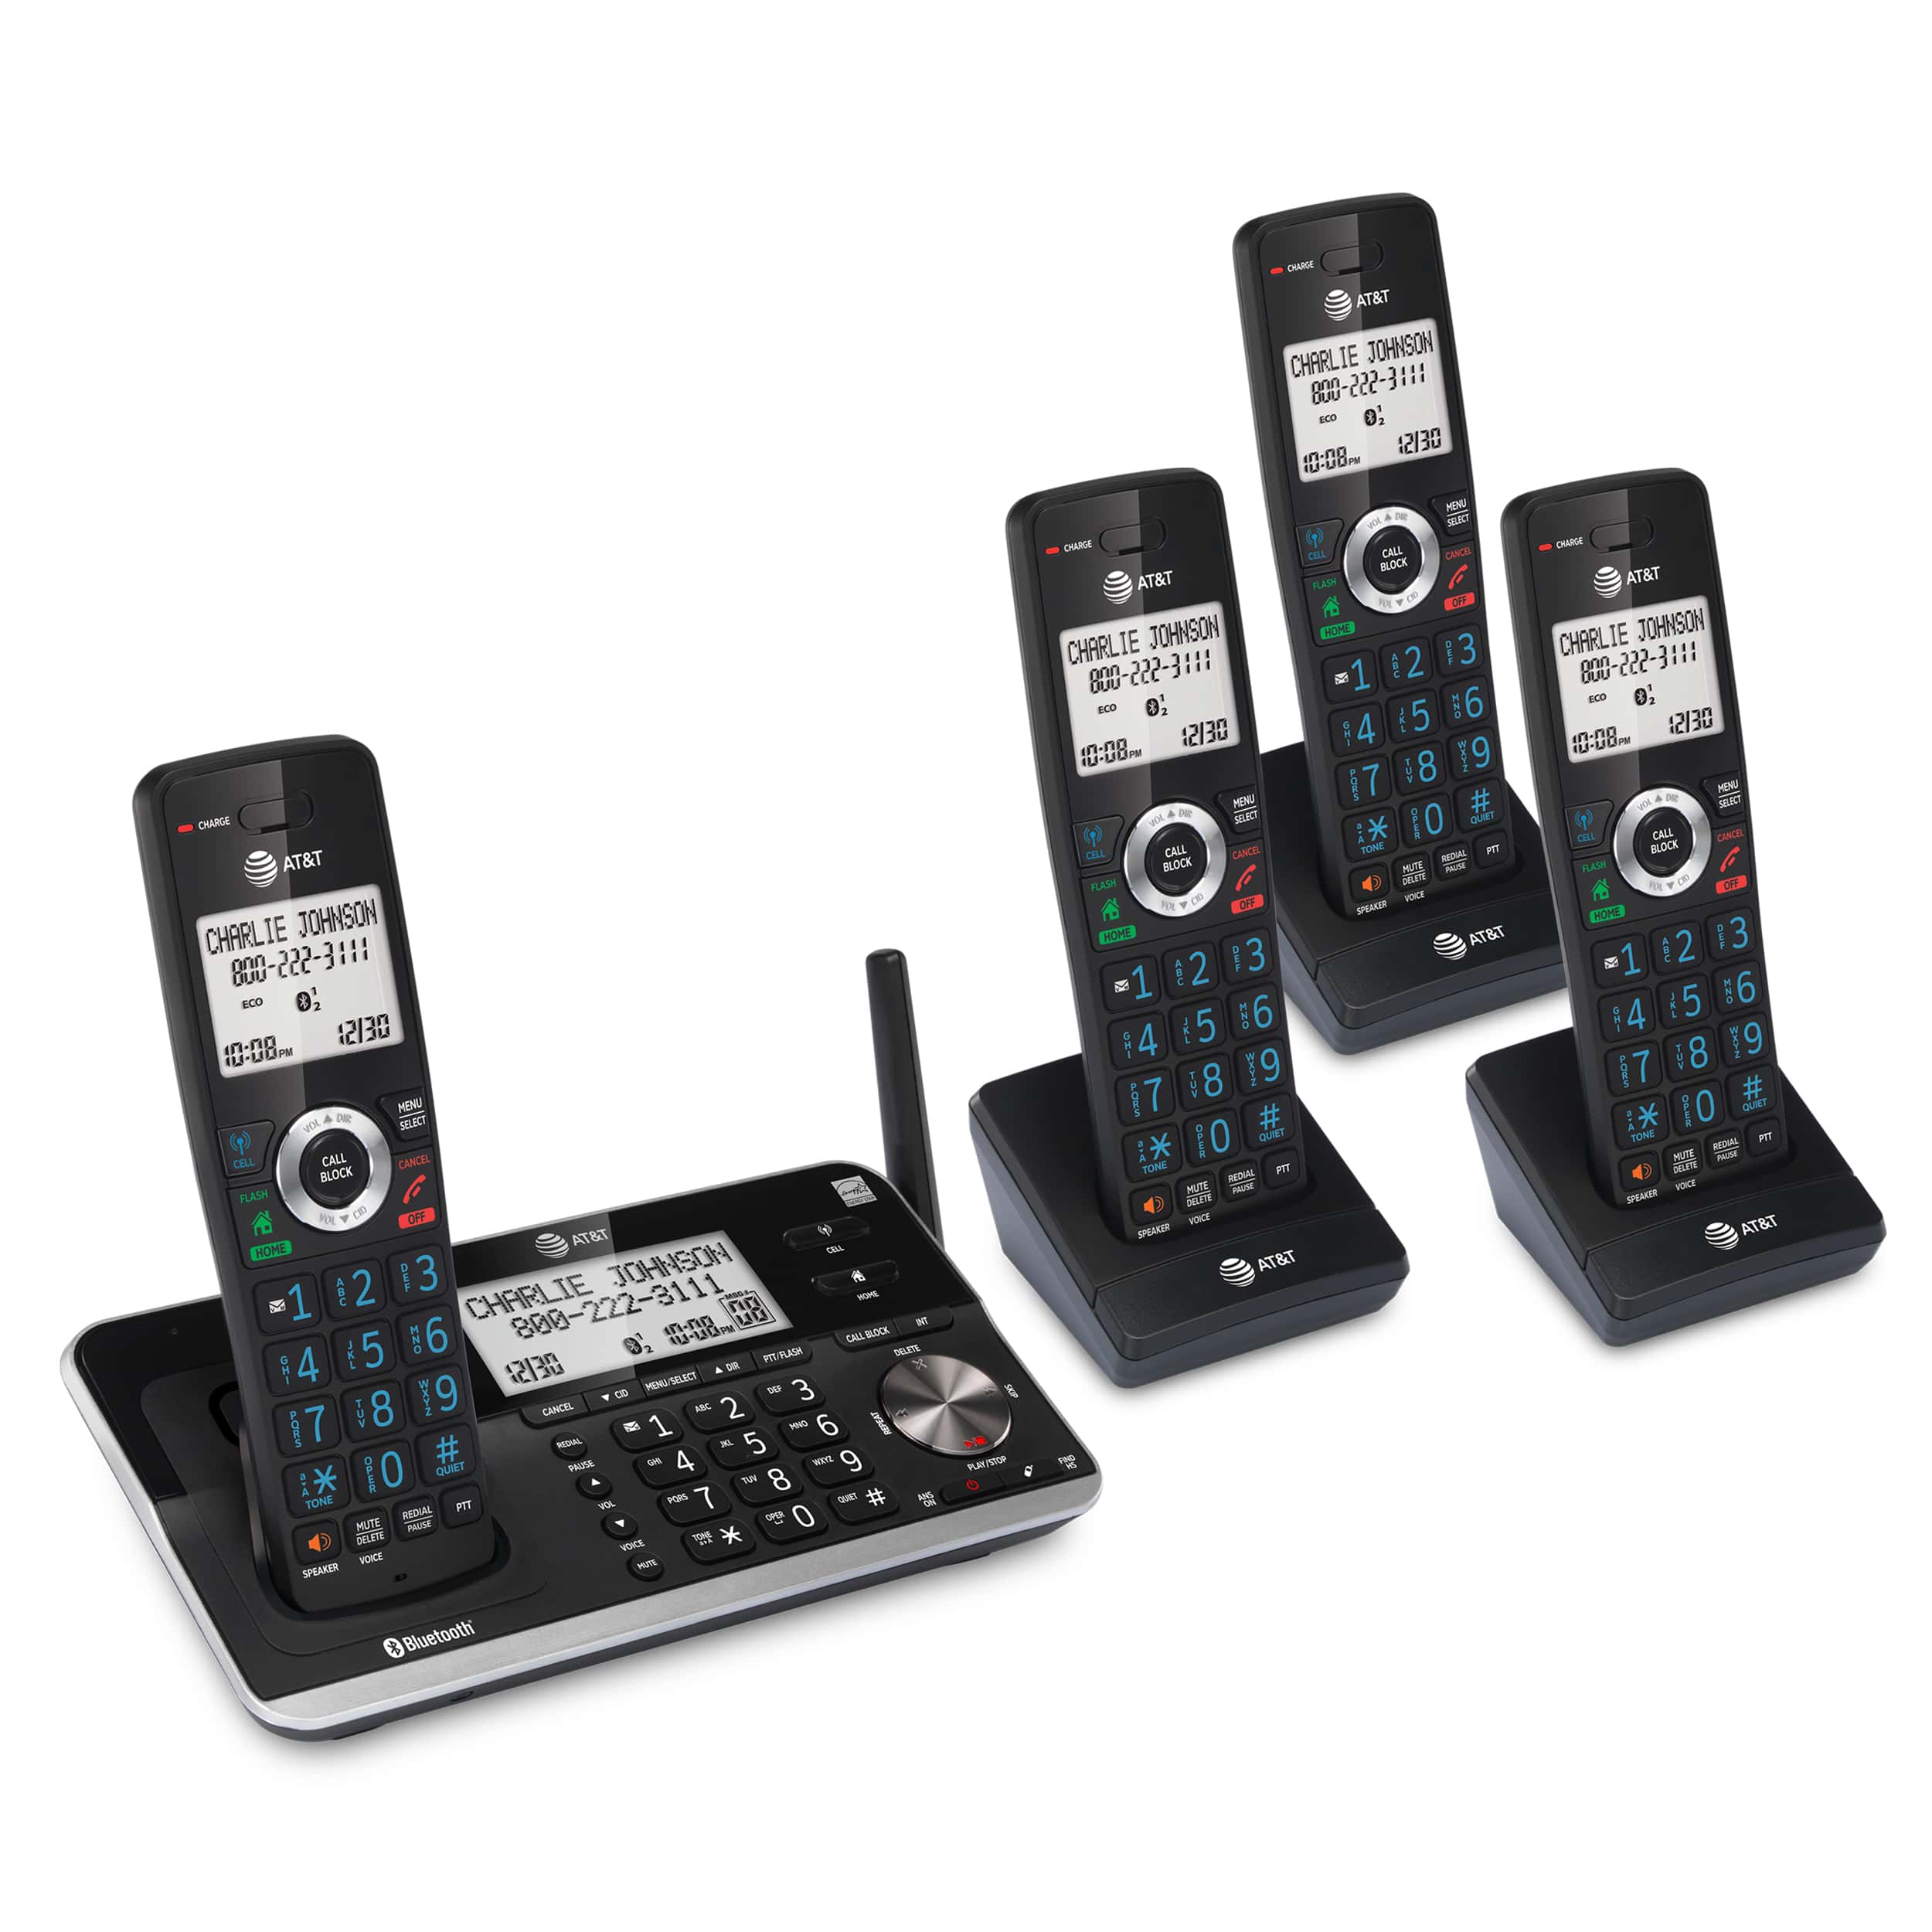 4-Handset Expandable Cordless Phone with Unsurpassed Range, Bluetooth Connect to Cell™, Smart Call Blocker and Answering System - view 3